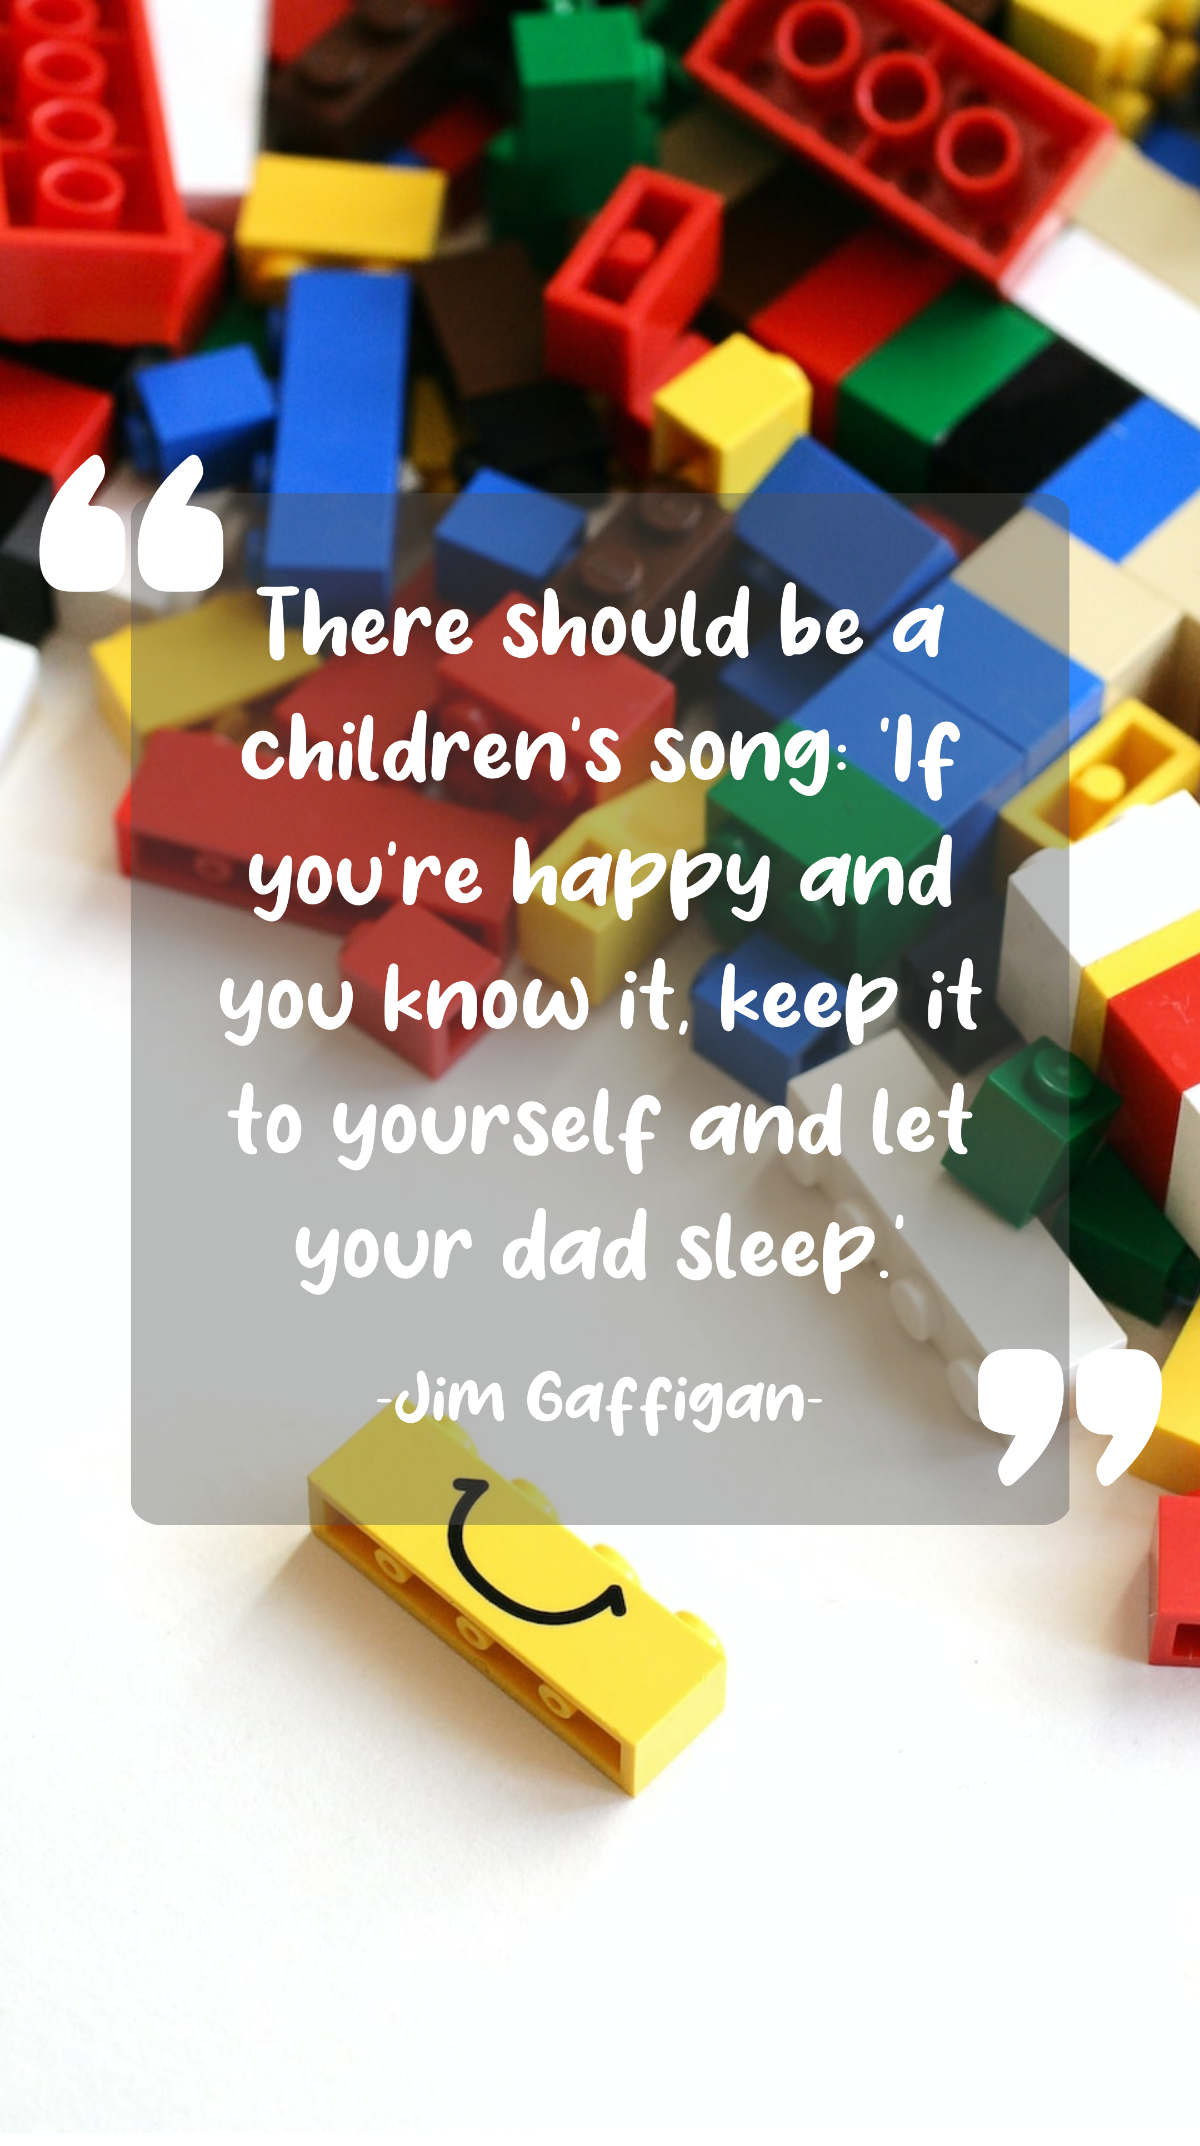 Jim Gaffigan - There should be a children’s song: ‘If you’re happy and you know it, keep it to yourself and let your dad sleep. Template